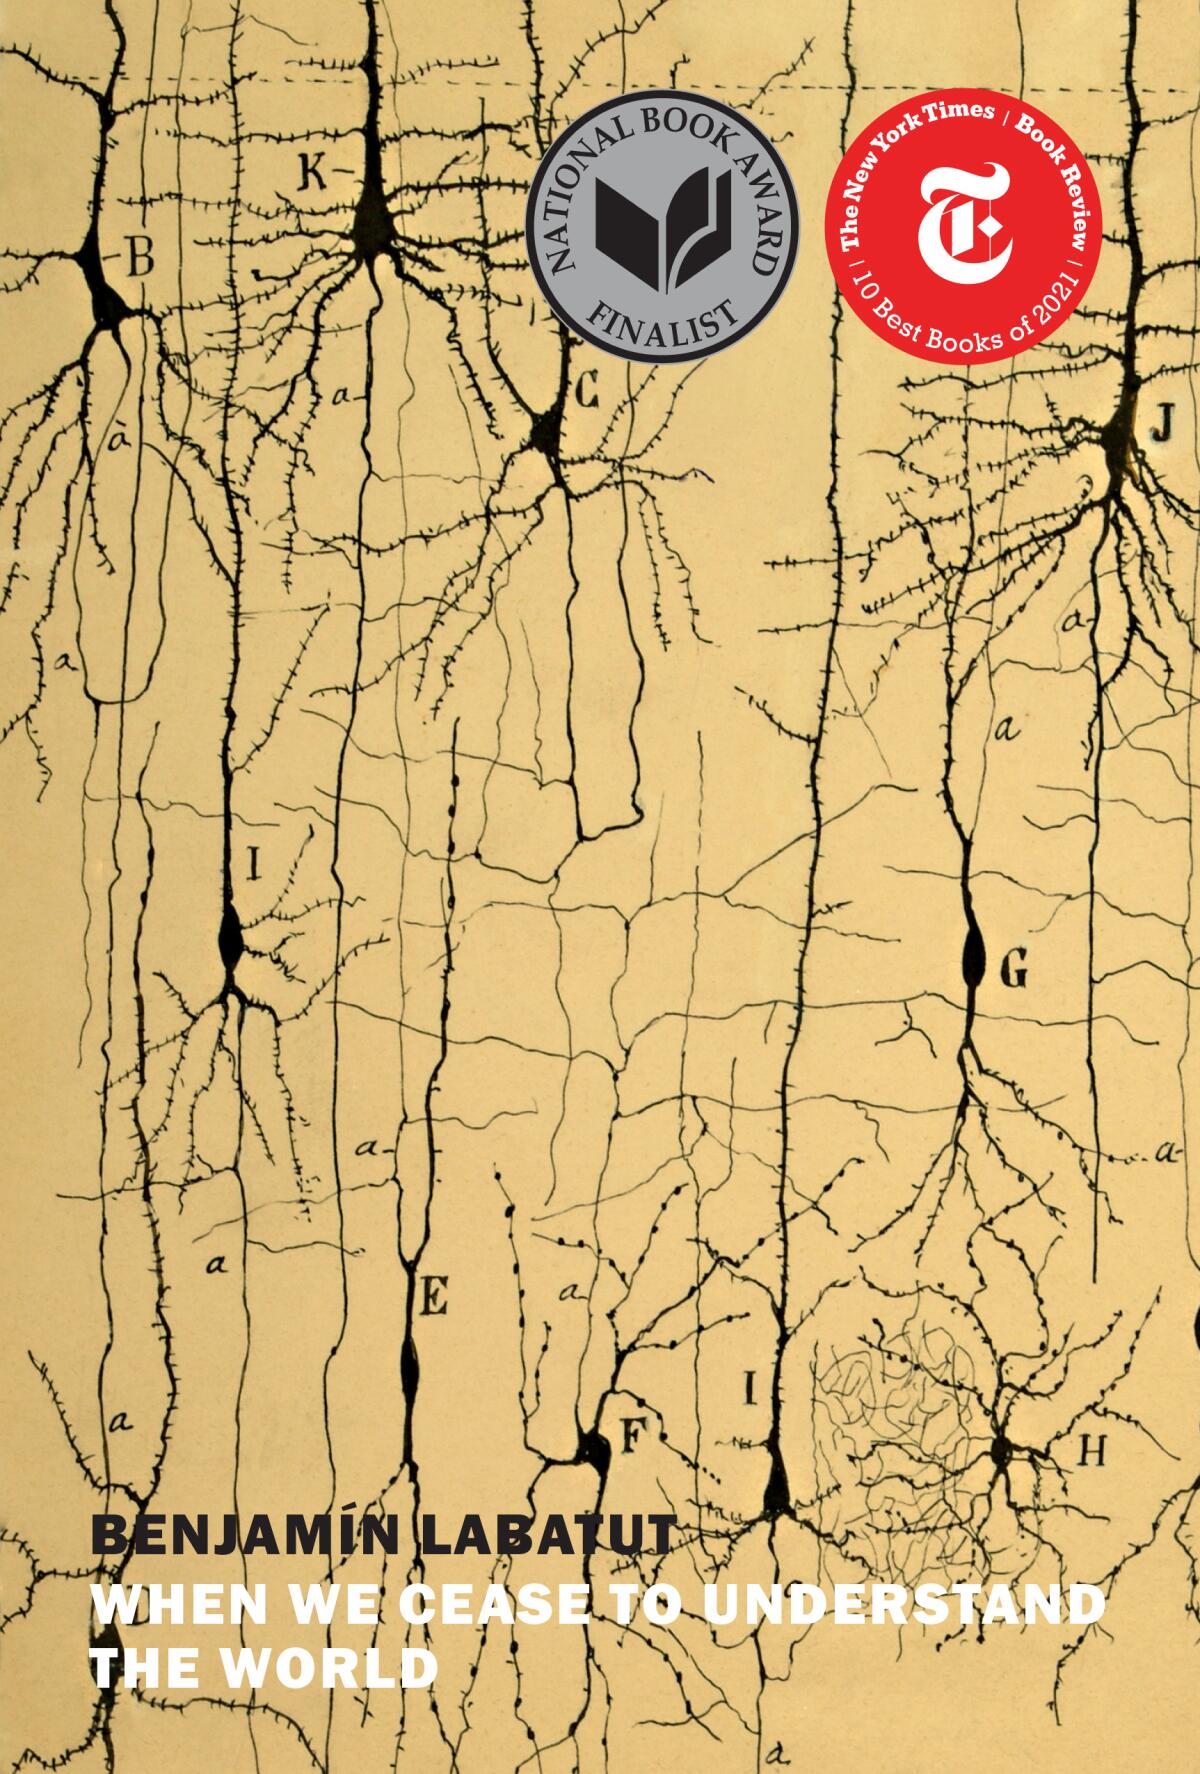 A yellow-ish book cover shows abstracted mappings that resemble synapses